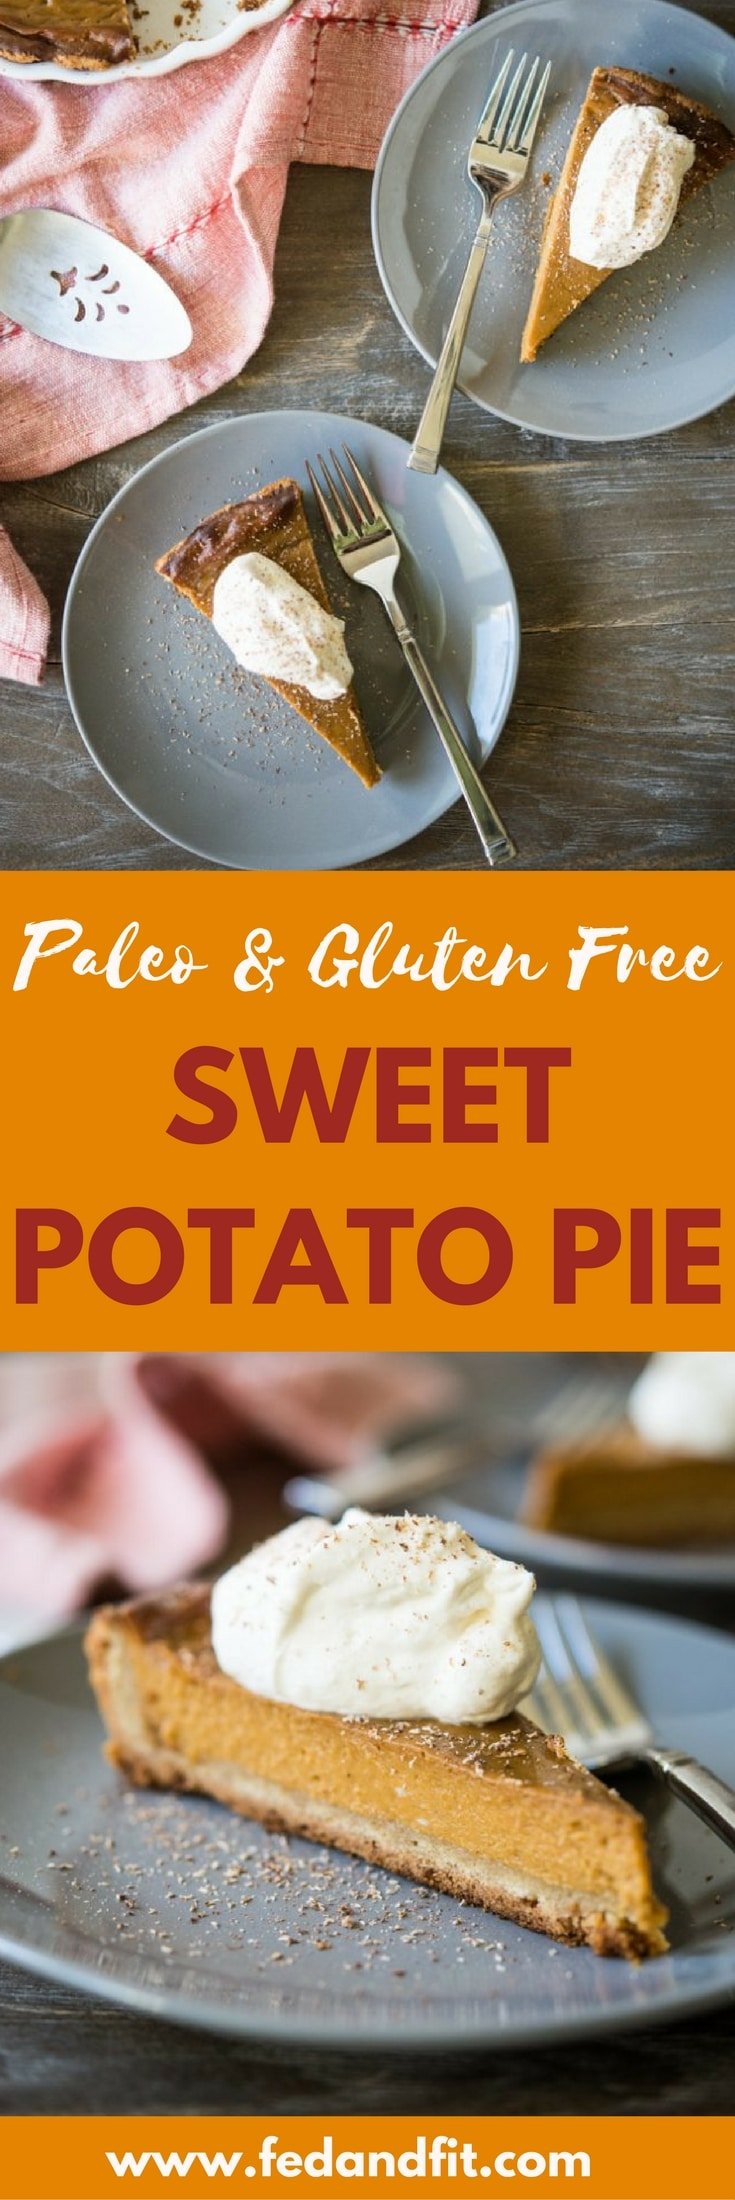 This Paleo sweet potato pie is a decadent, silky smooth pie made with a few sweet potatoes, plenty of butter, coconut sugar, vibrant spices, and coconut milk. It is the perfect gluten free pie for your Thanksgiving and Christmas celebrations!